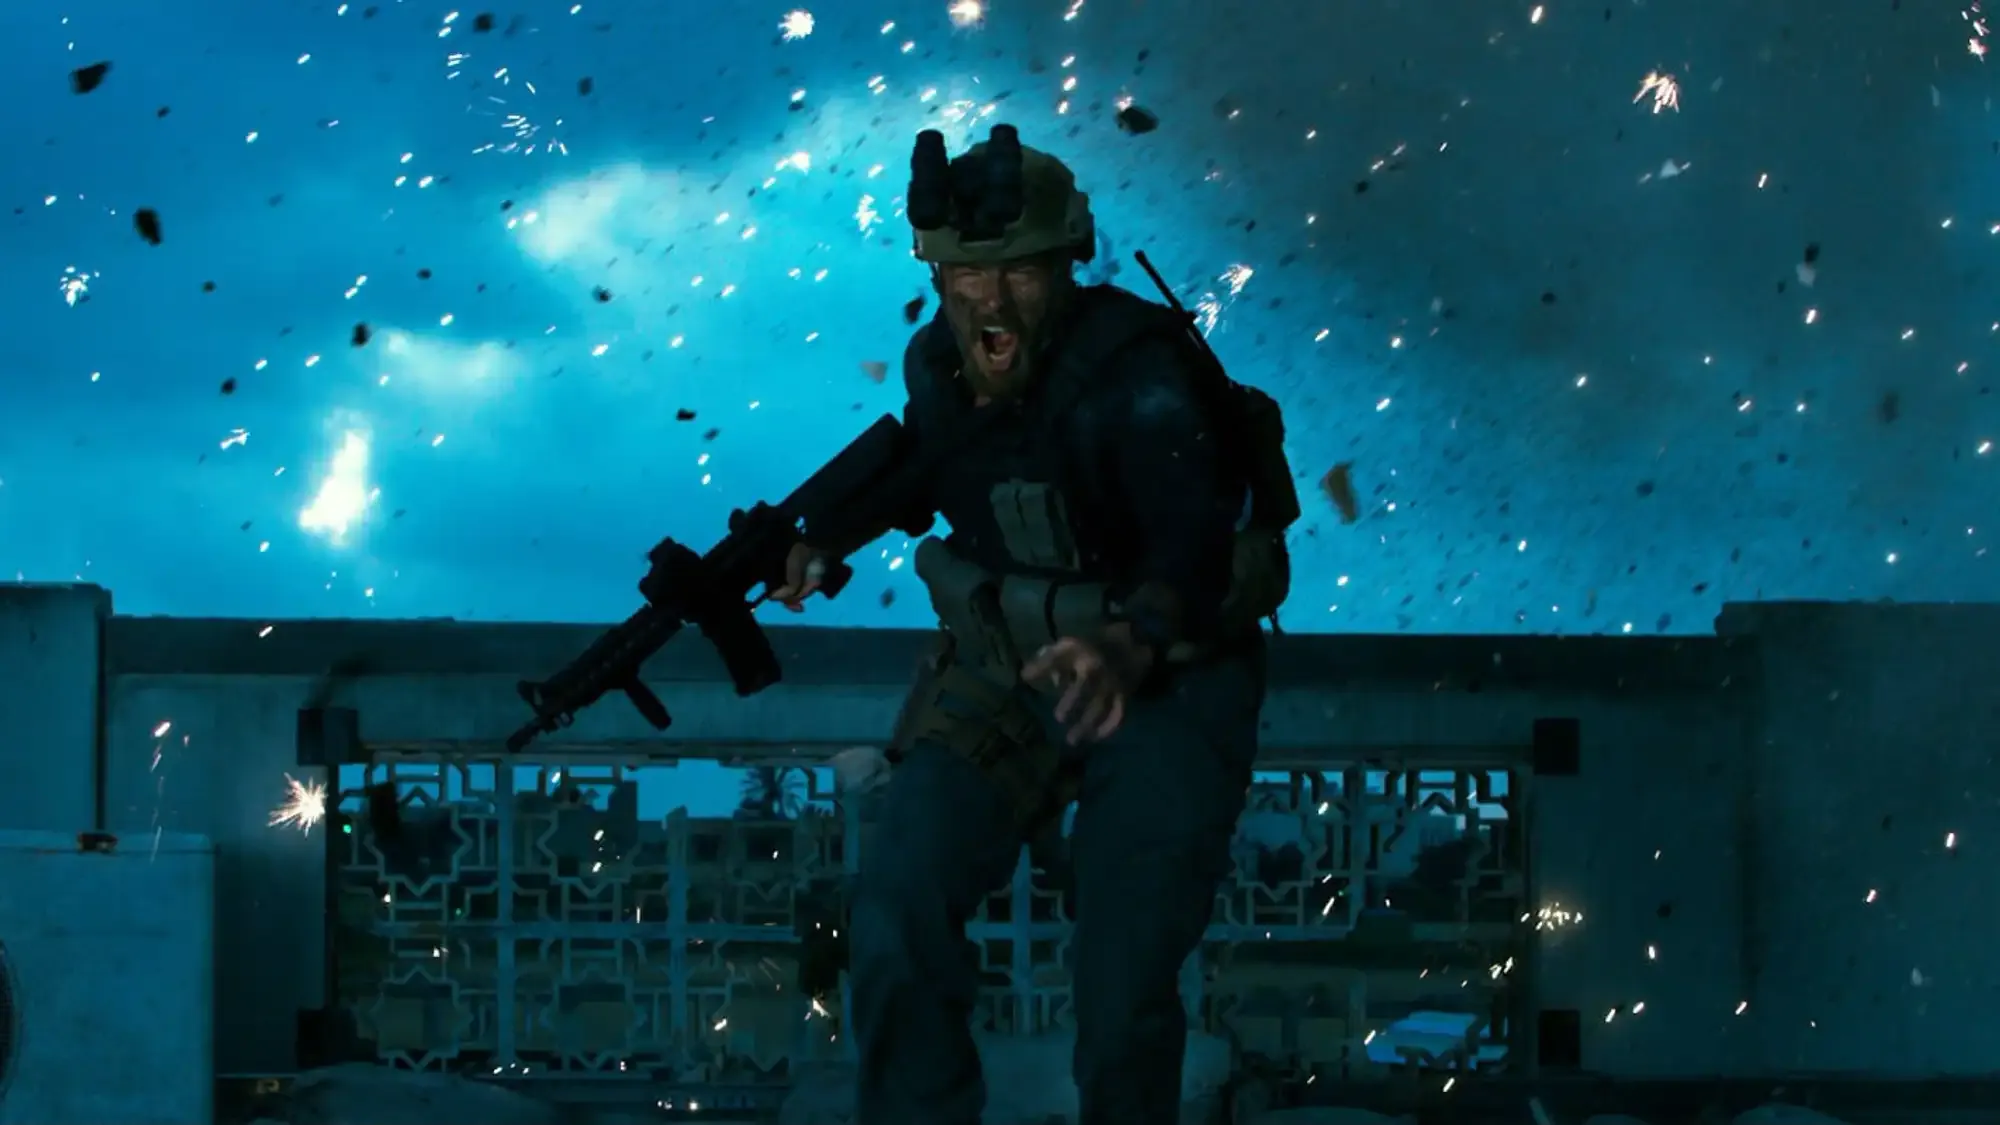 13 Hours: The Secret Soldiers of Benghazi movie review